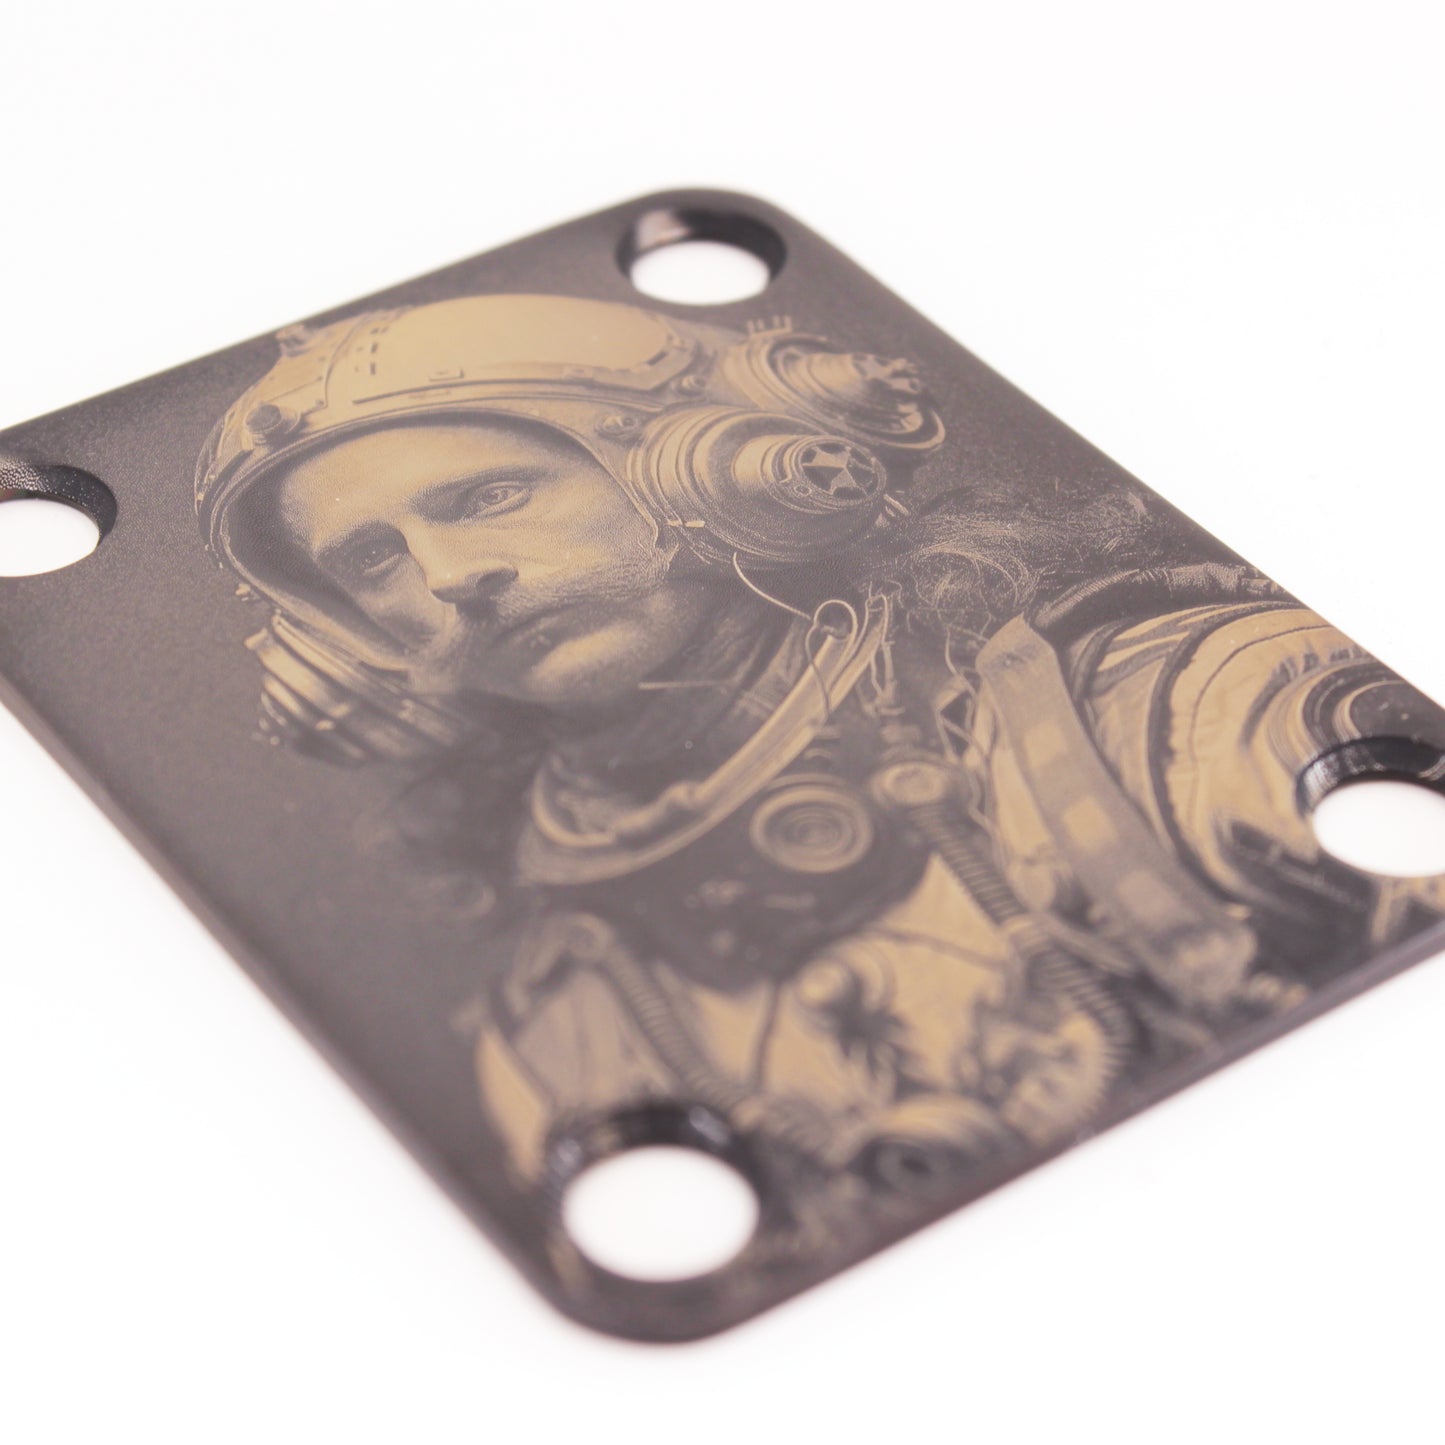 Guitar neck plate - Alan Mike, Astronaut of sounds - Fender size